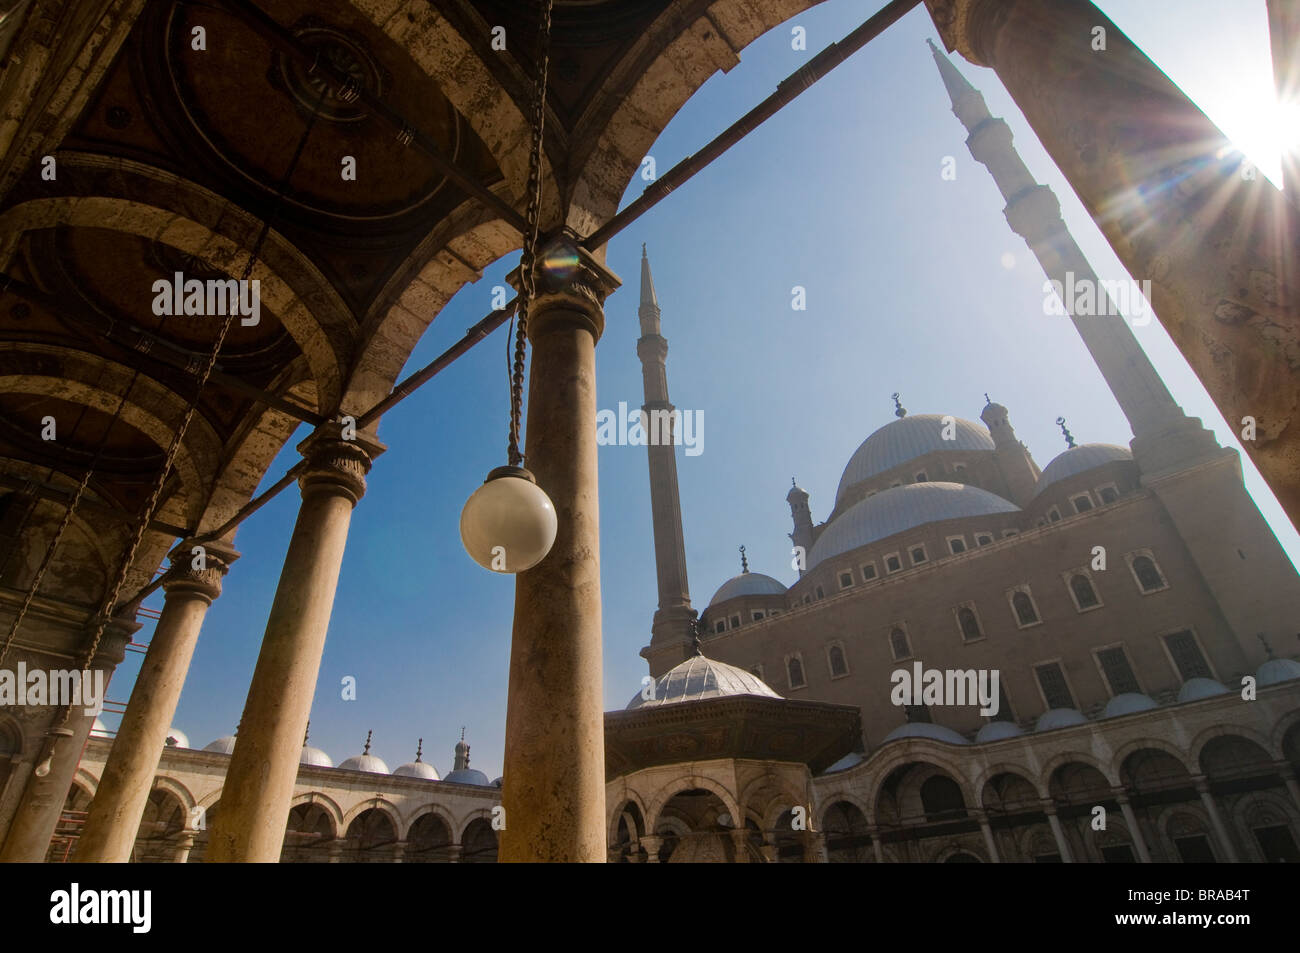 Mosque of Mohammed Ali, Cairo, Egypt, North Africa, Africa Stock Photo